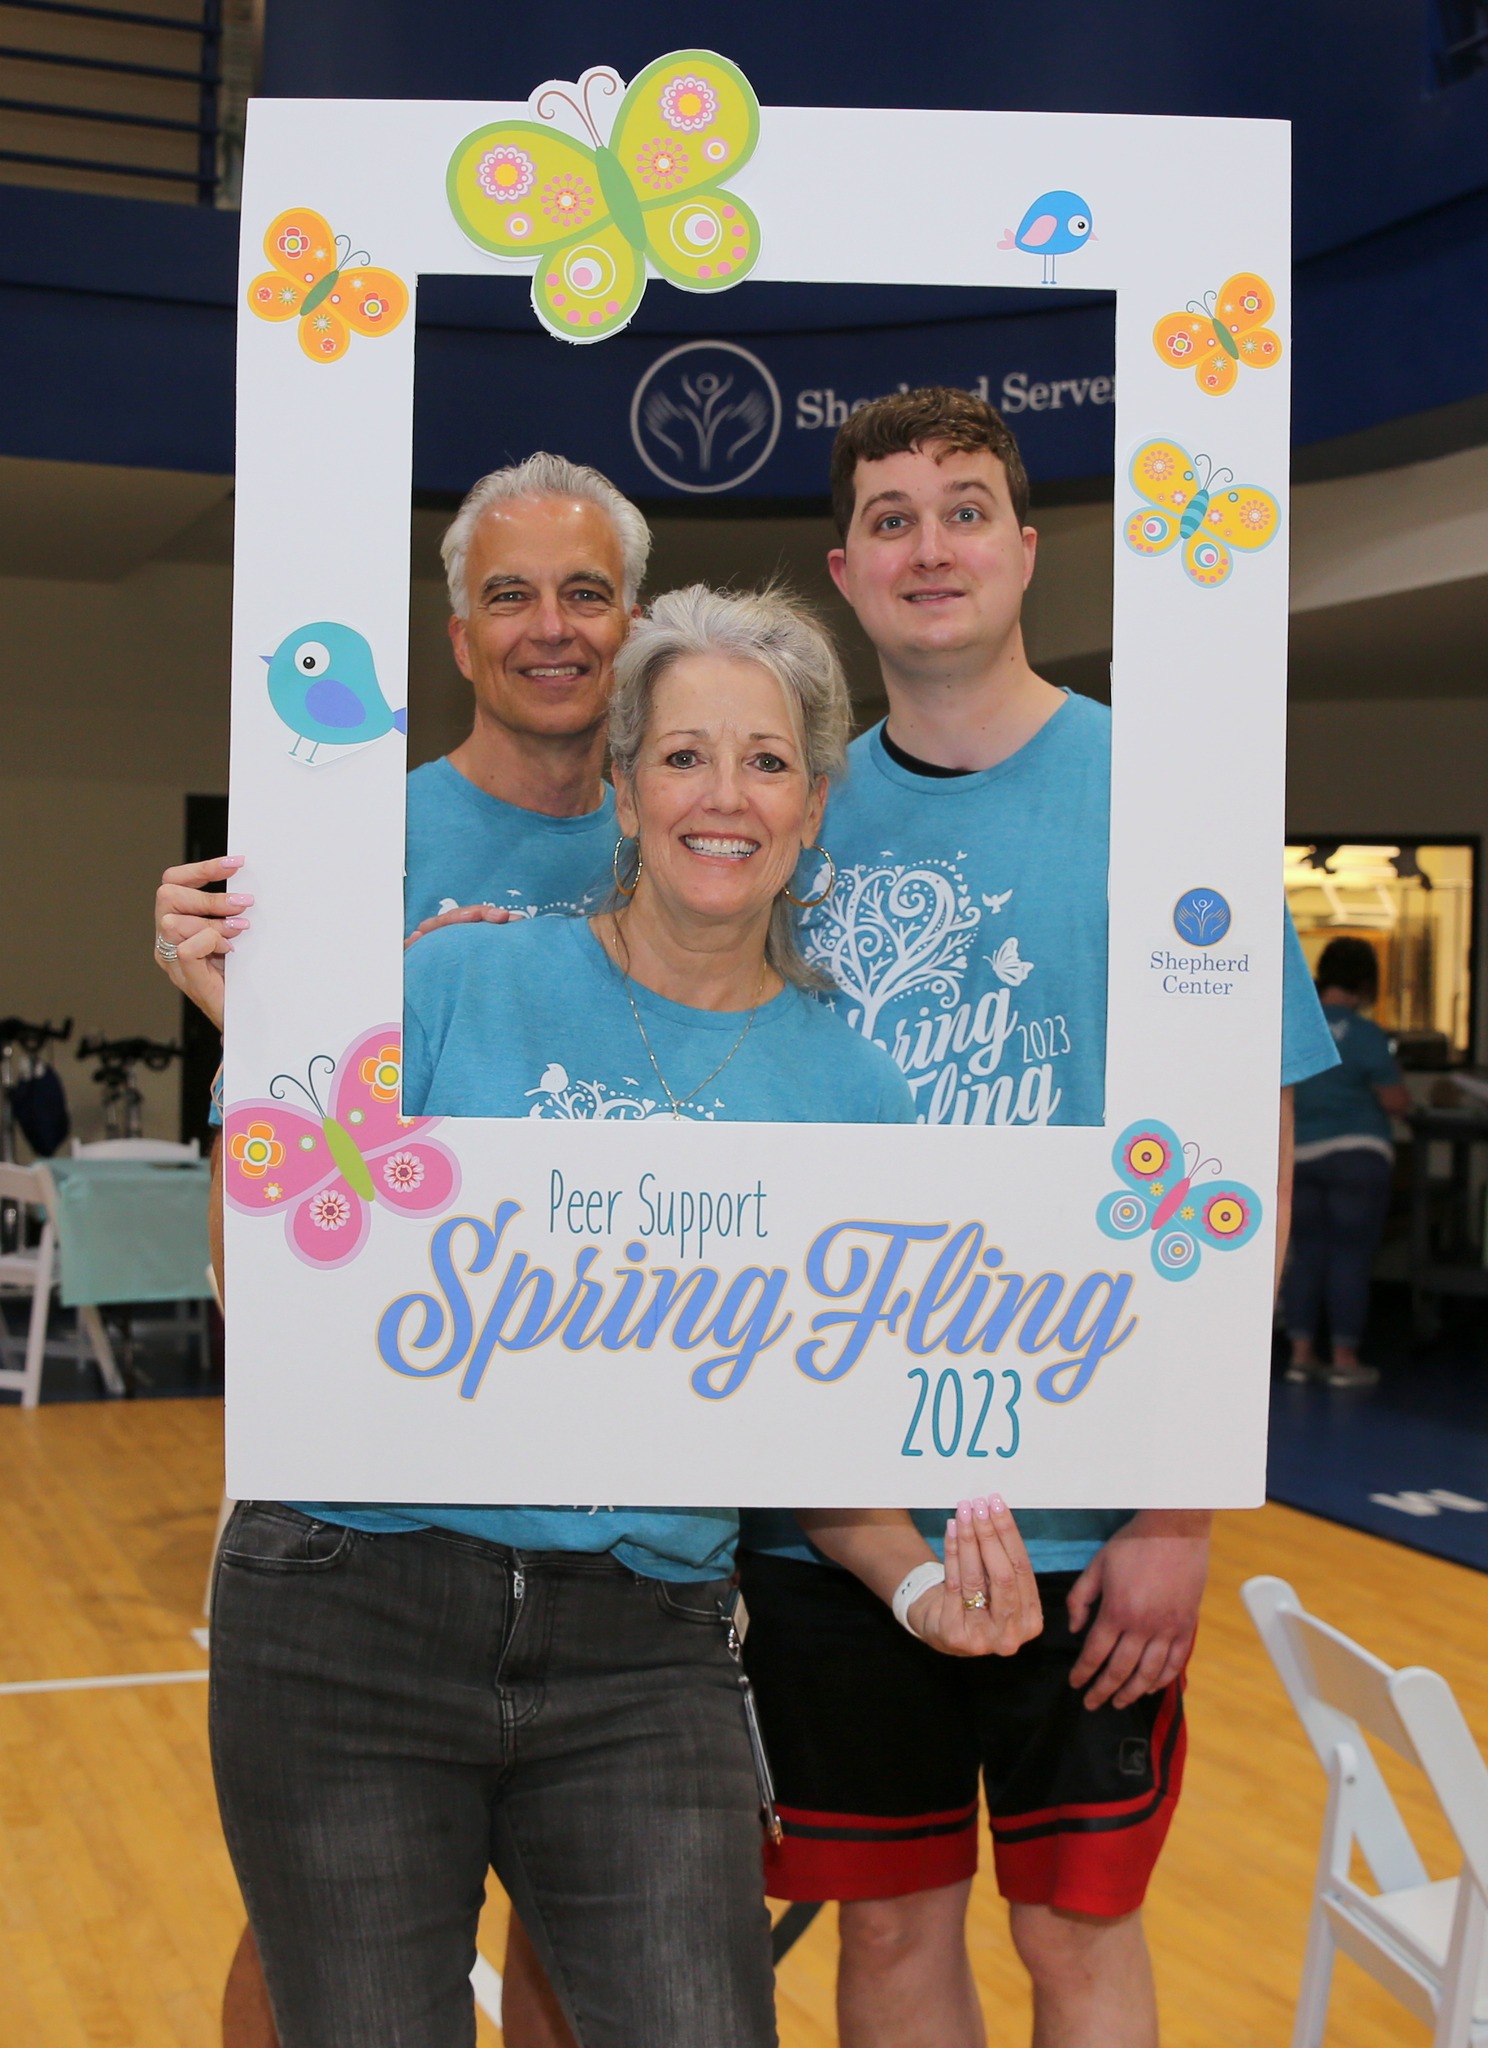 Peer Support Liaison, Mariellen Jacobs, poses behind a lifesize photo frame with two Shepherd patients. The frame reads, "Peer Support Spring Fling 2023."